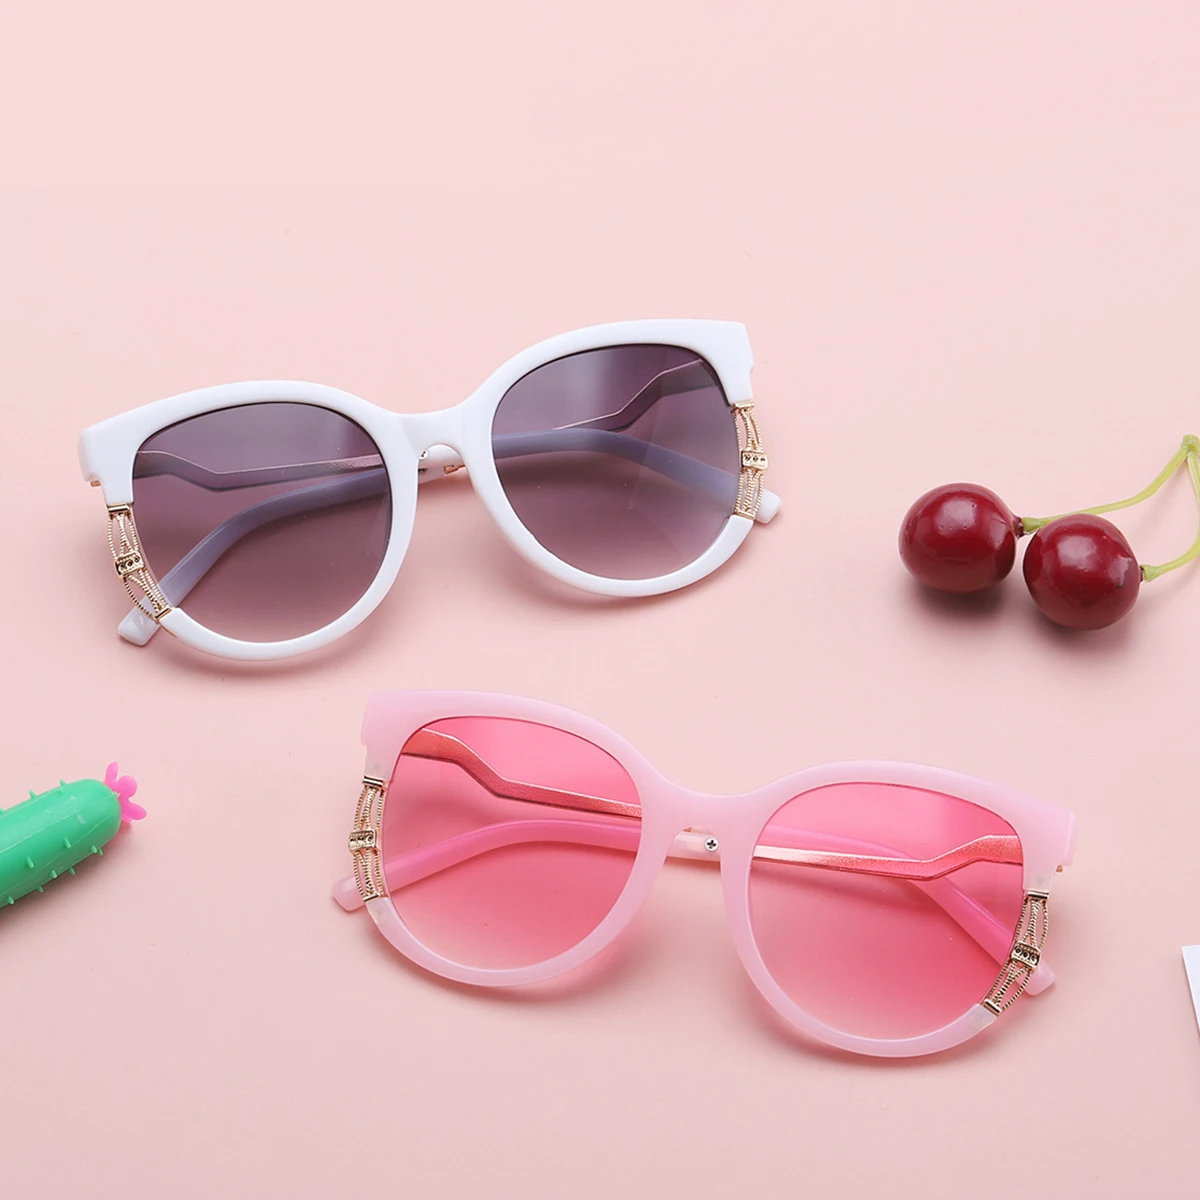 

Pink Square Kids Sunglasses Children Cute Metal Sun Glasses Girls Boys Baby Colored Lenses Eyeglasses Vogue Trends 2021 Gifts